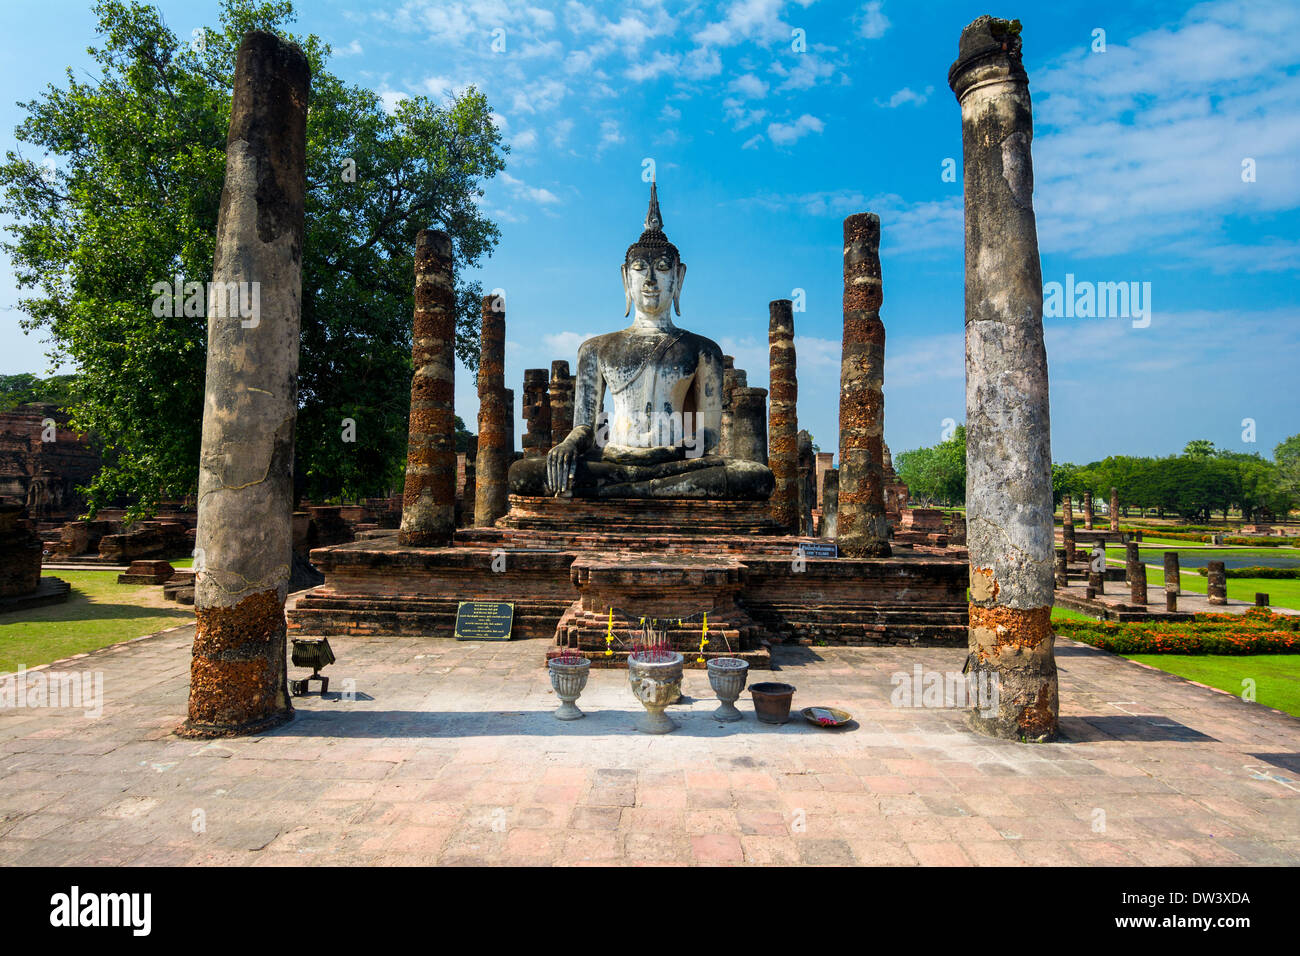 Sitting Budha in Wat Mahathat, historical park which covers the ruins of the old city of Sukhothai, Thailanda Stock Photo